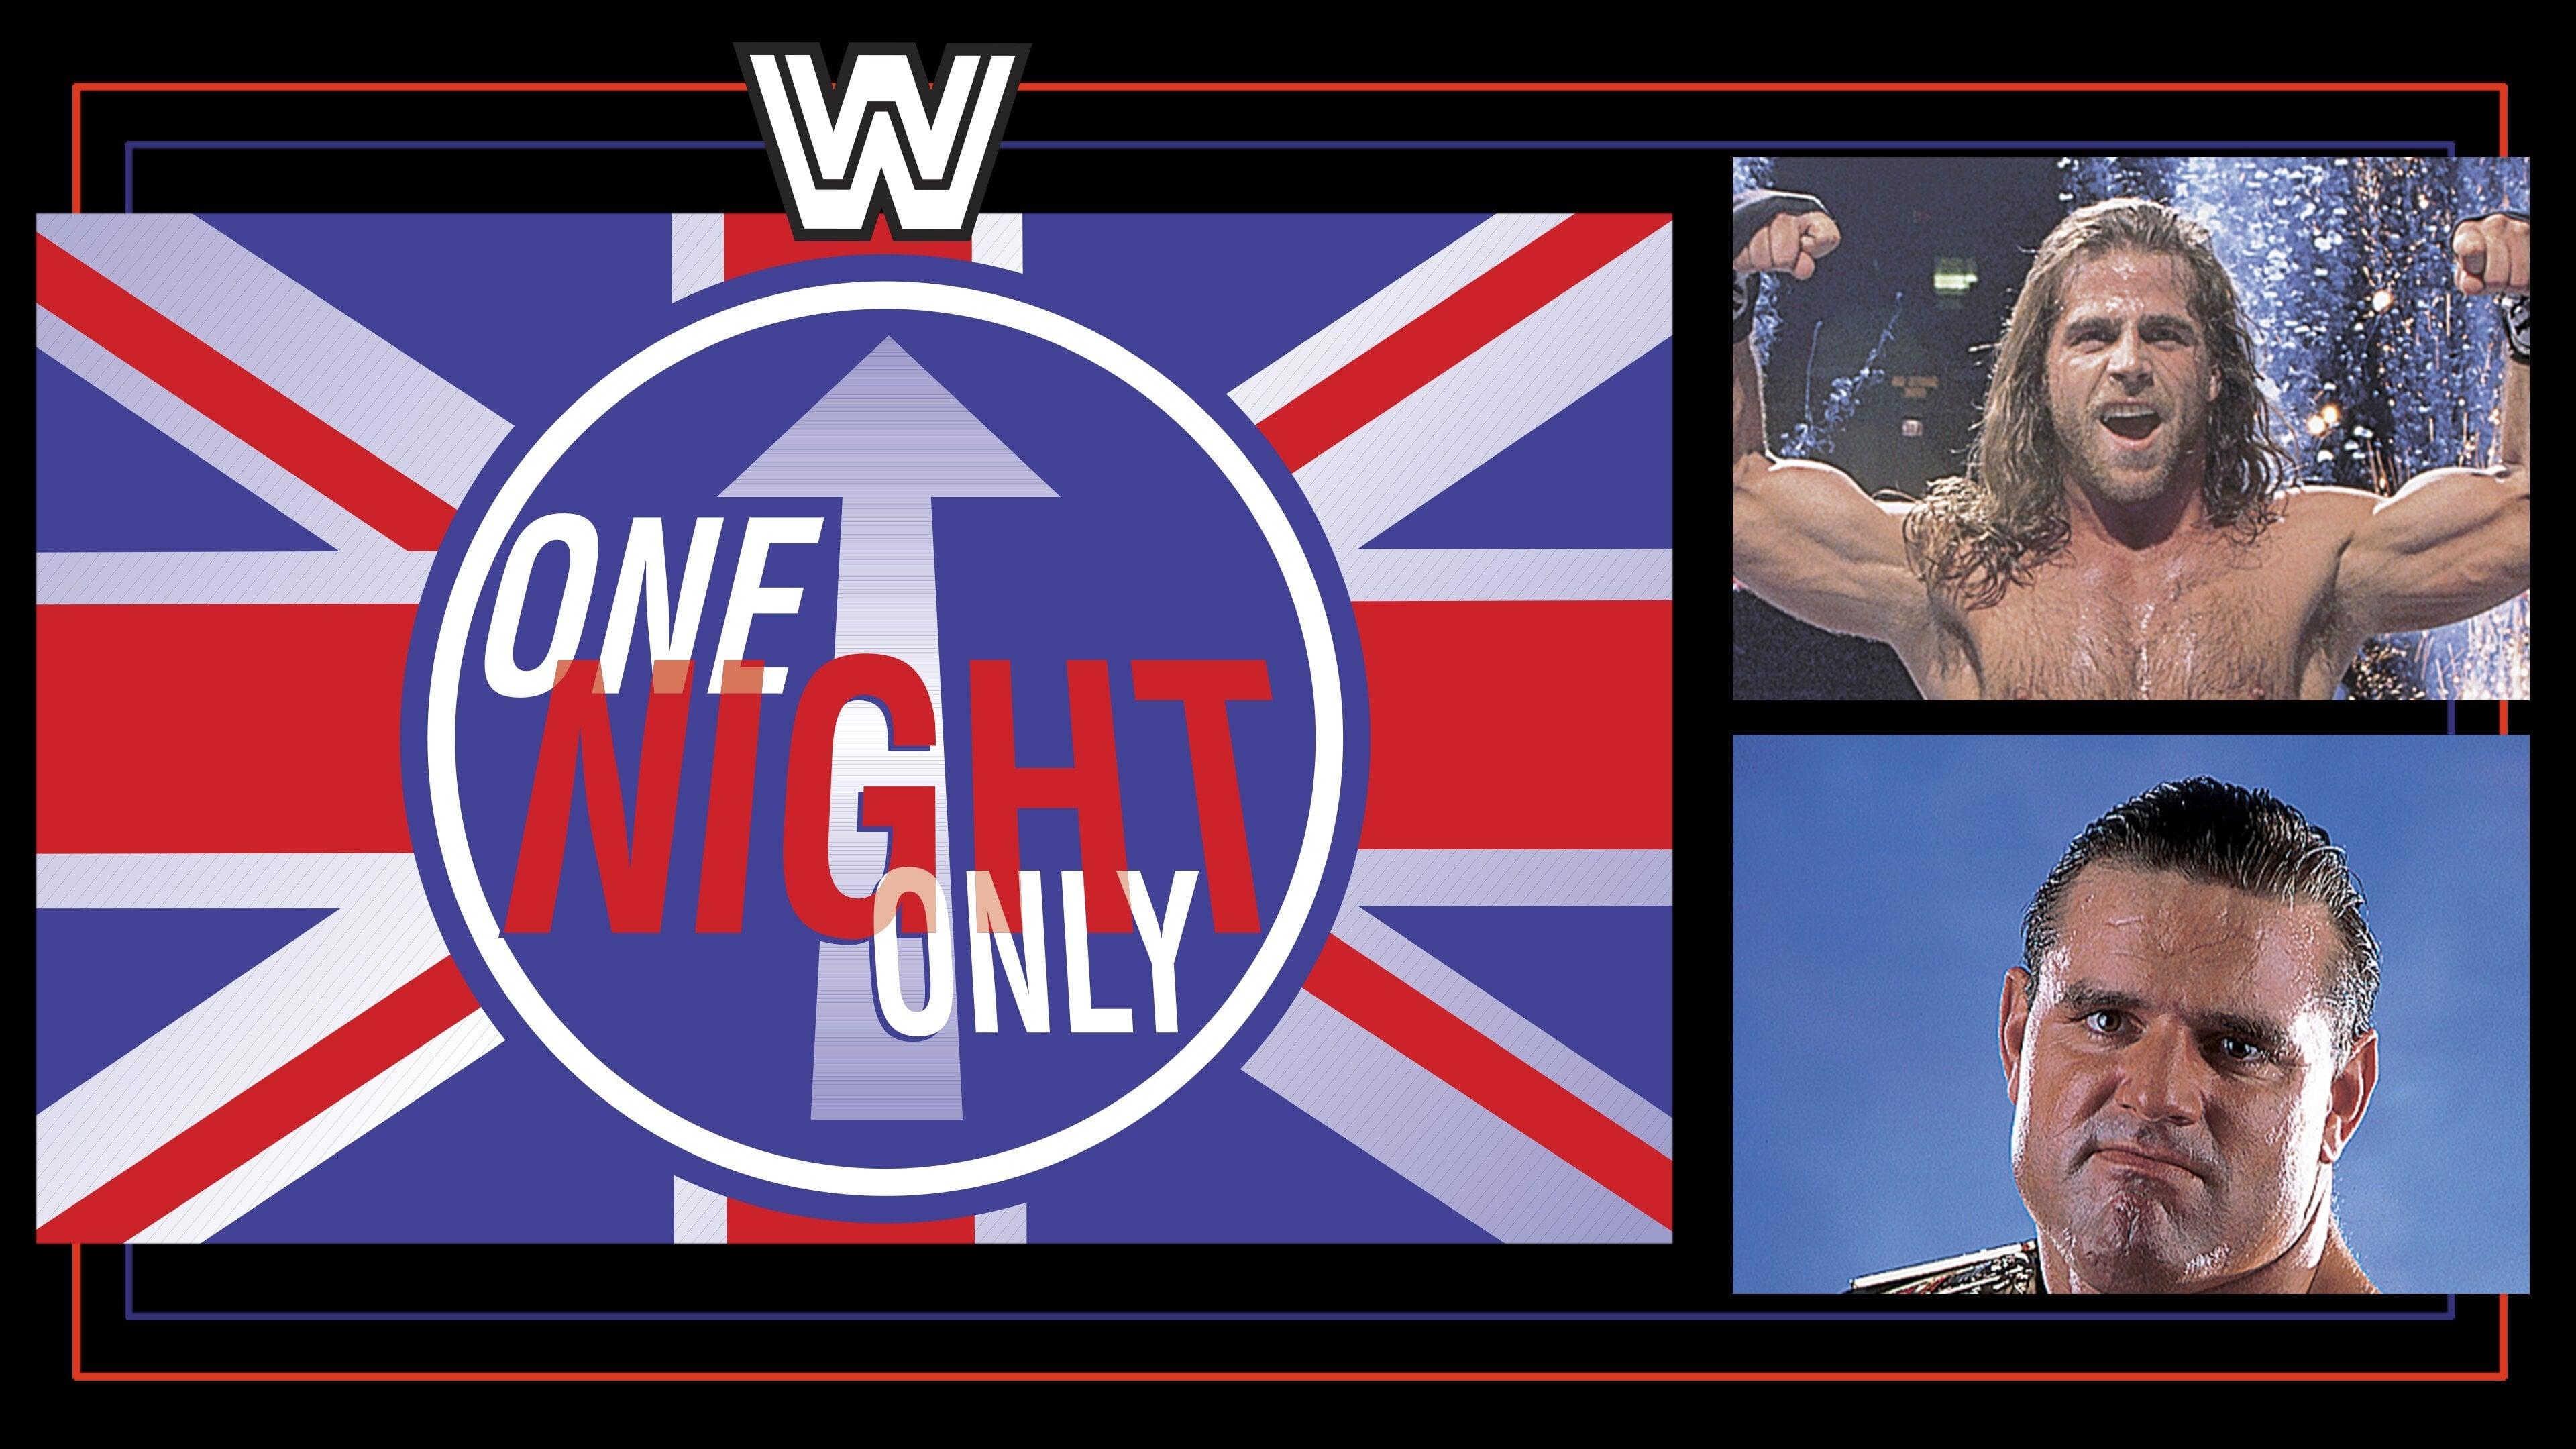 WWE One Night Only backdrop